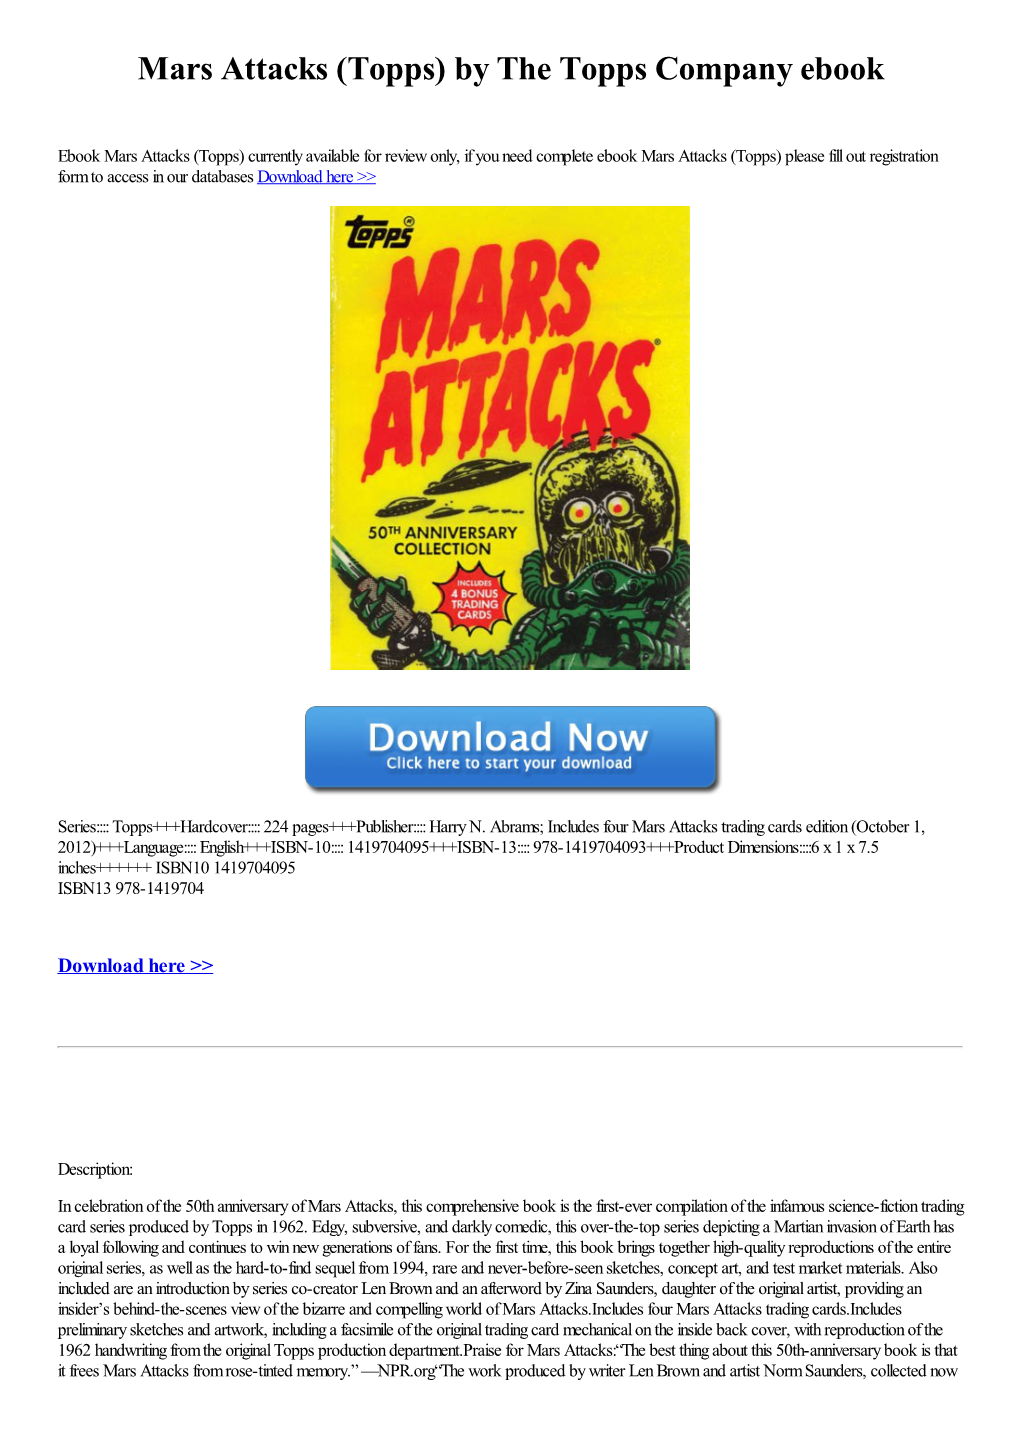 Mars Attacks (Topps) by the Topps Company Ebook